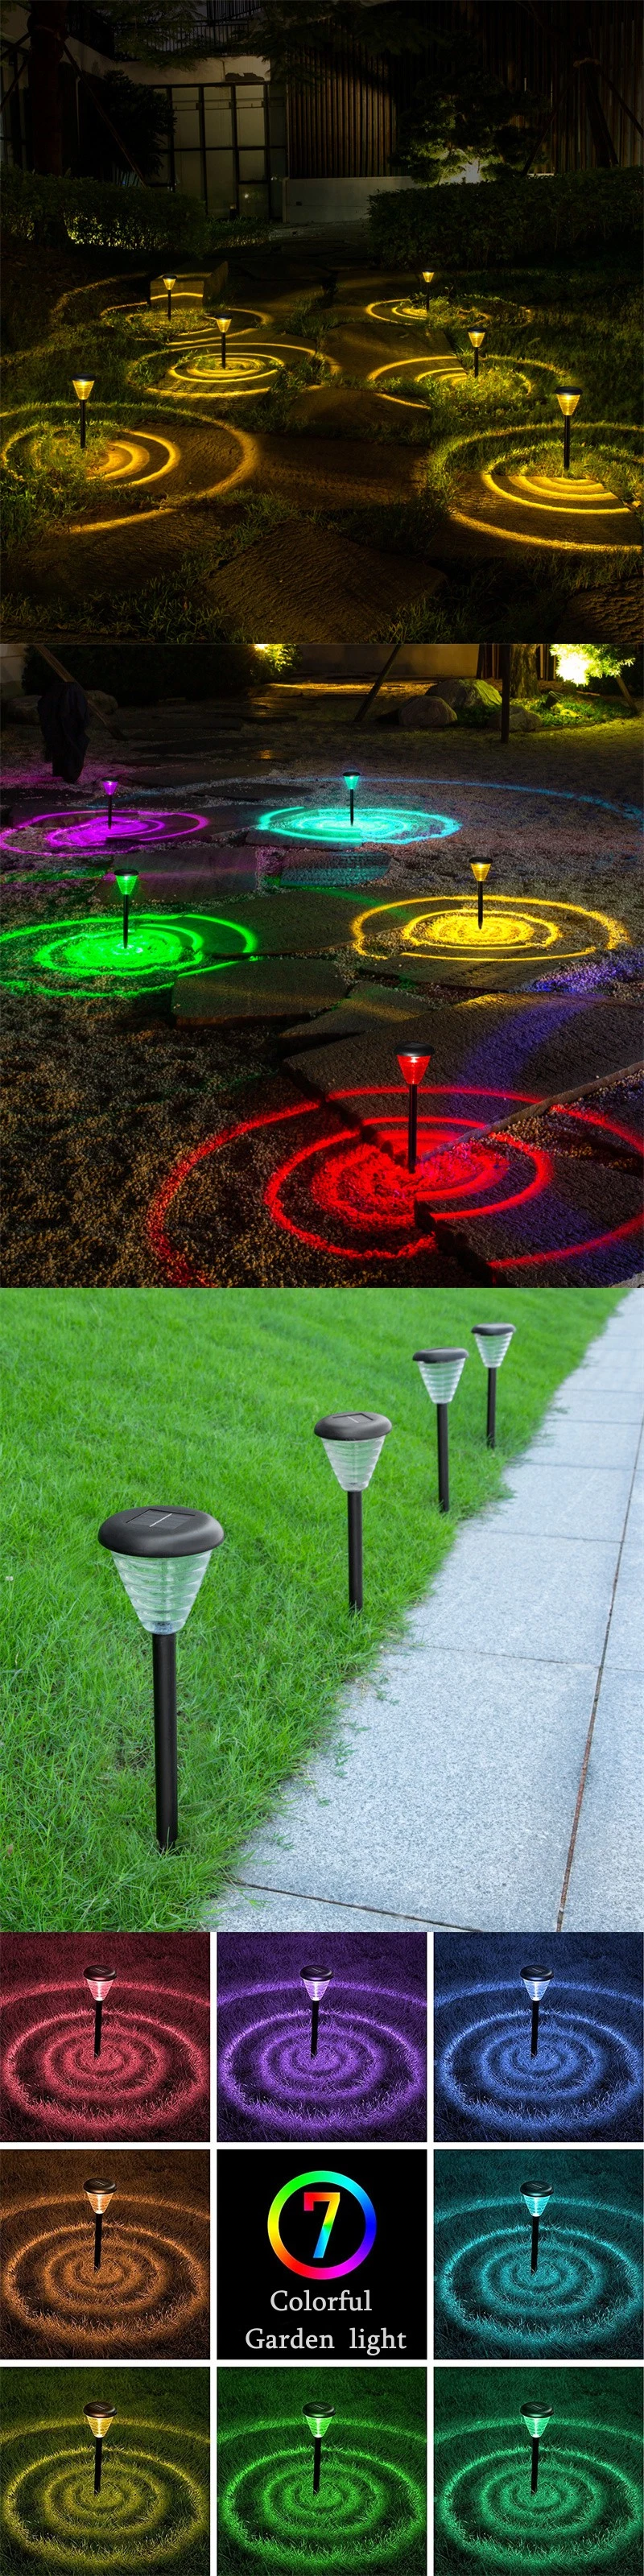 Quality Outdoor Lighting RGB 1.5W Colorful Ground Plug Light Park Pathy Yard Lawn Lamp LED Decoration Waterproof Lanscape Solar Garden Lights